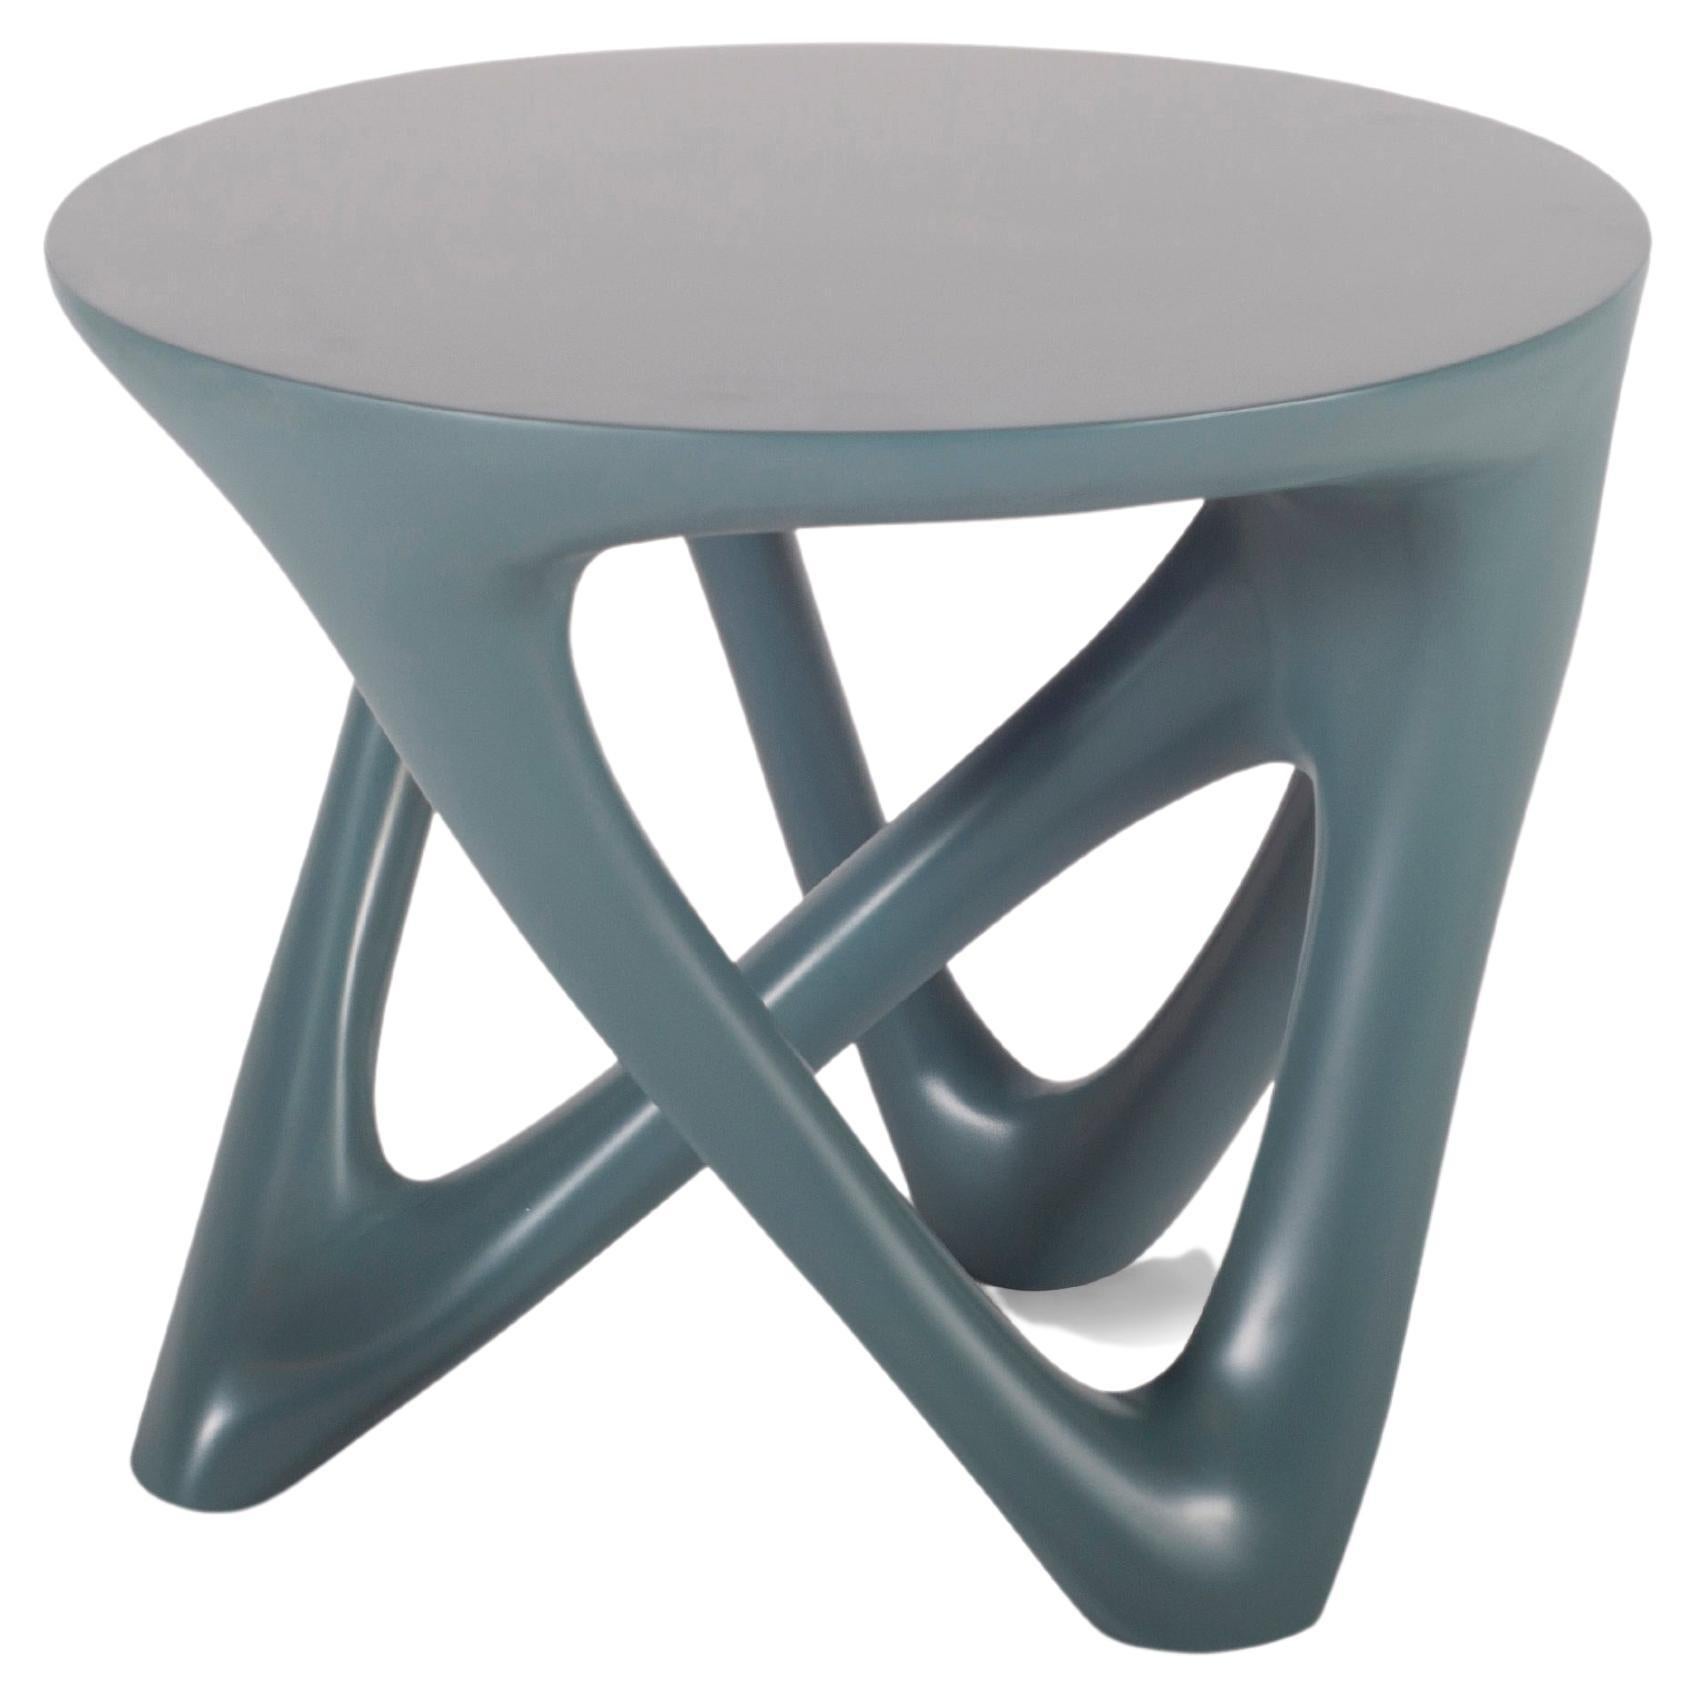 Amorph Ya Modern Side Table in Gray lacquer finish